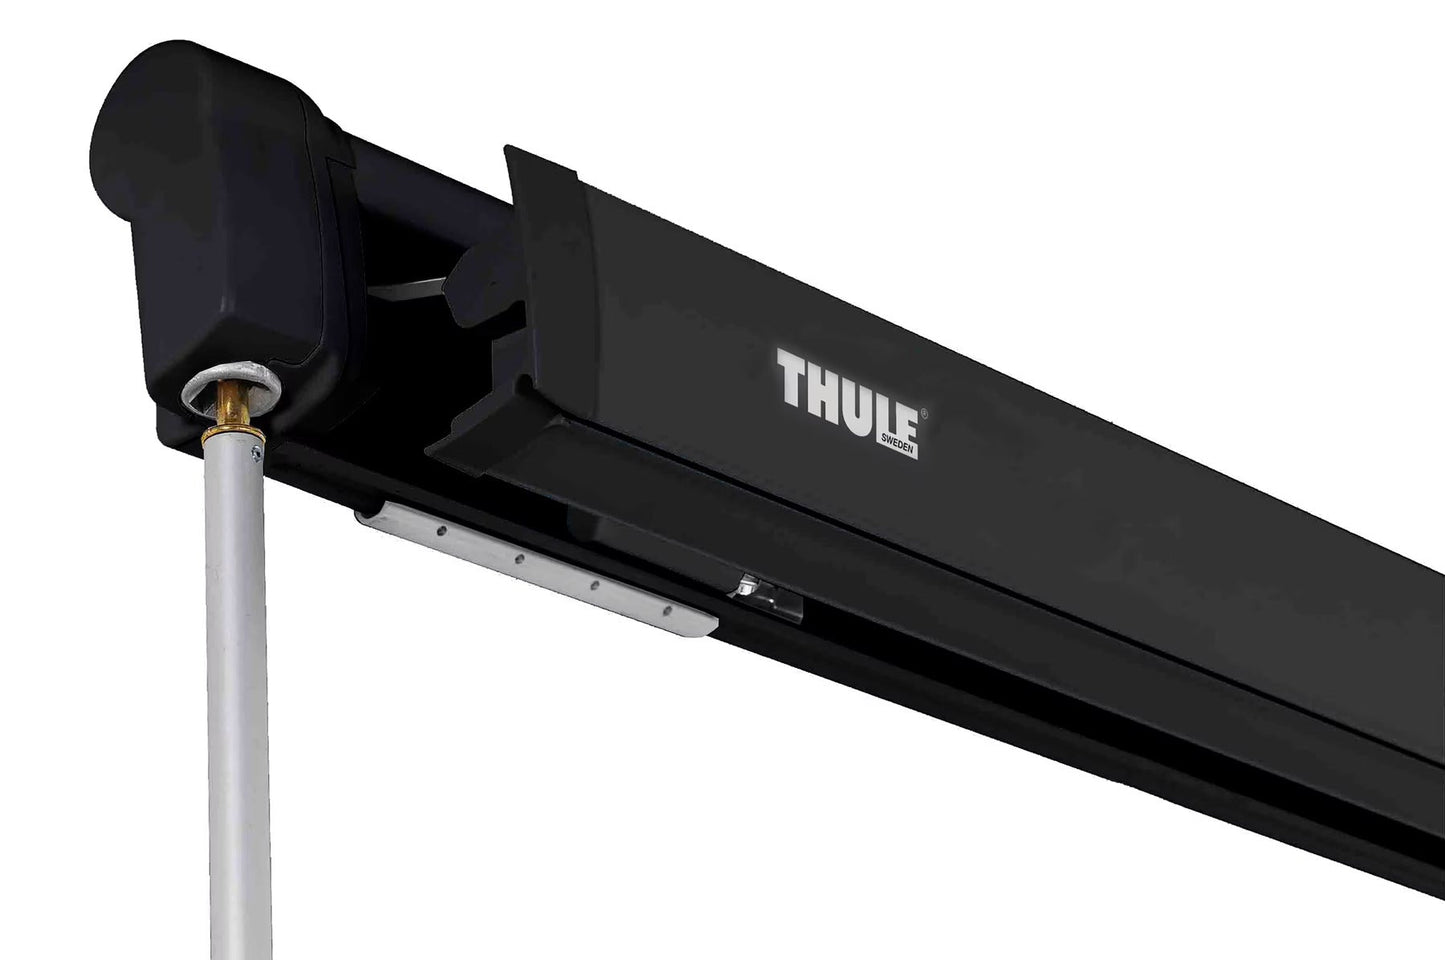 Thule HideAway Awning - 8.5ft - 490008